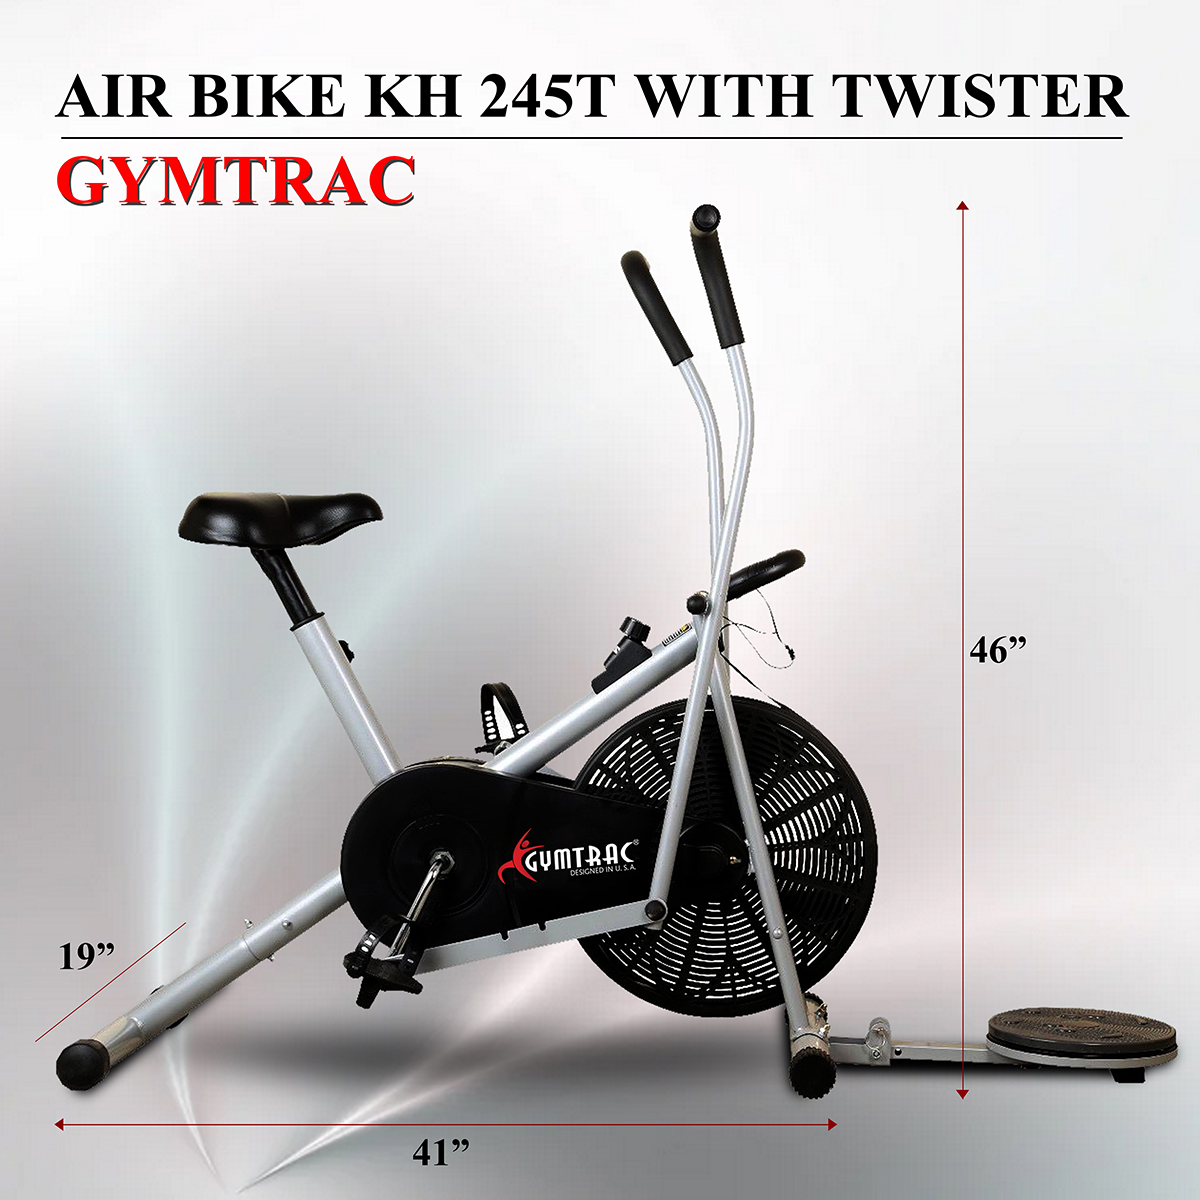 GYMTRAC KH 245T AIR BIKE WITH TWISTER